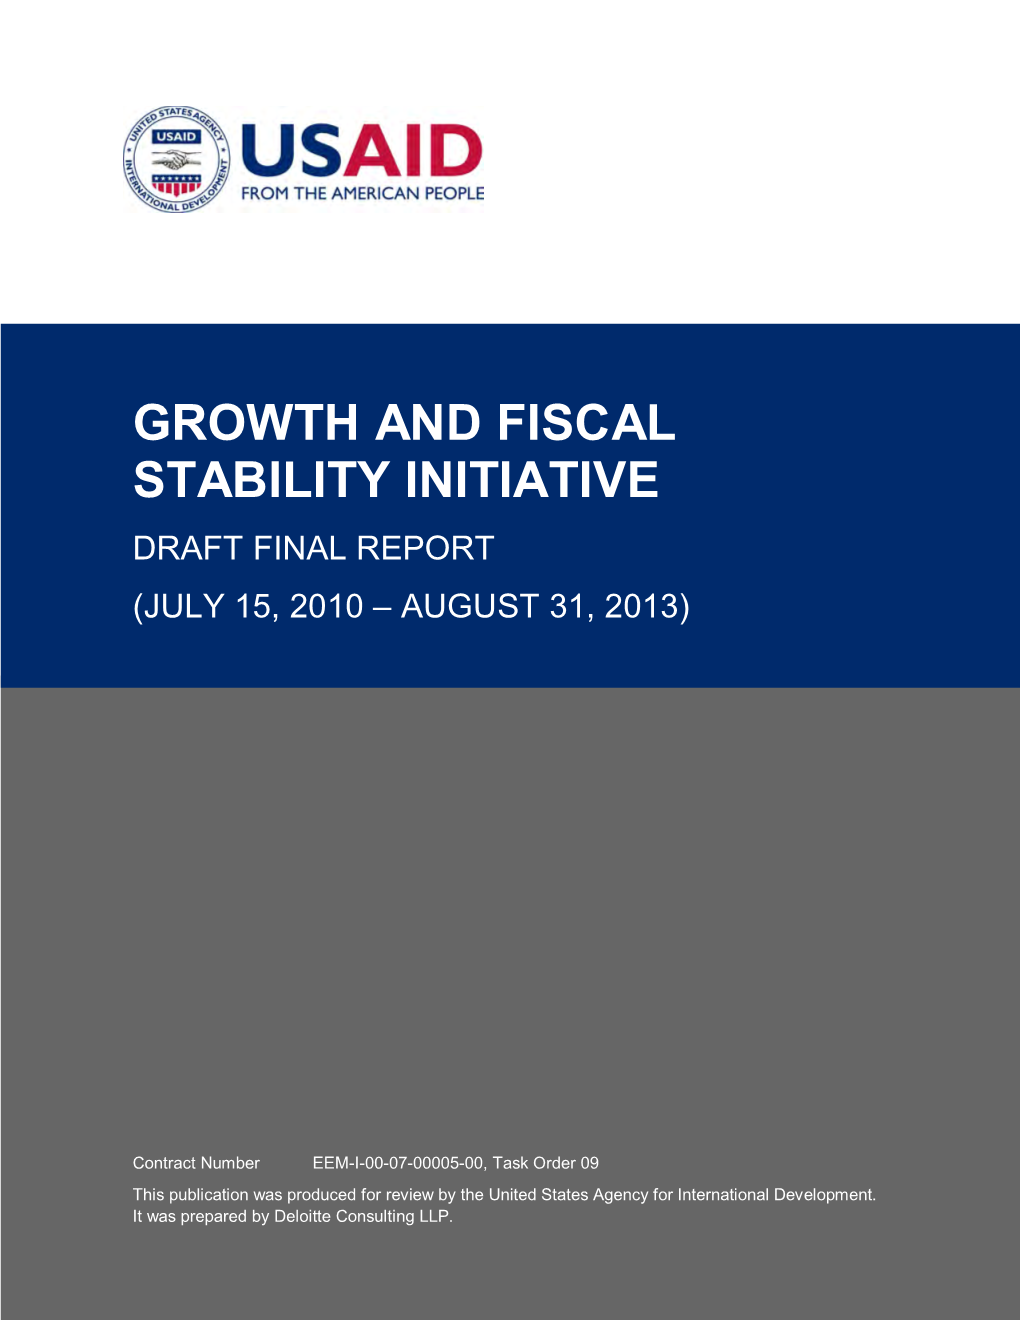 Growth and Fiscal Stability Initiative Draft Final Report (July 15, 2010 – August 31, 2013)